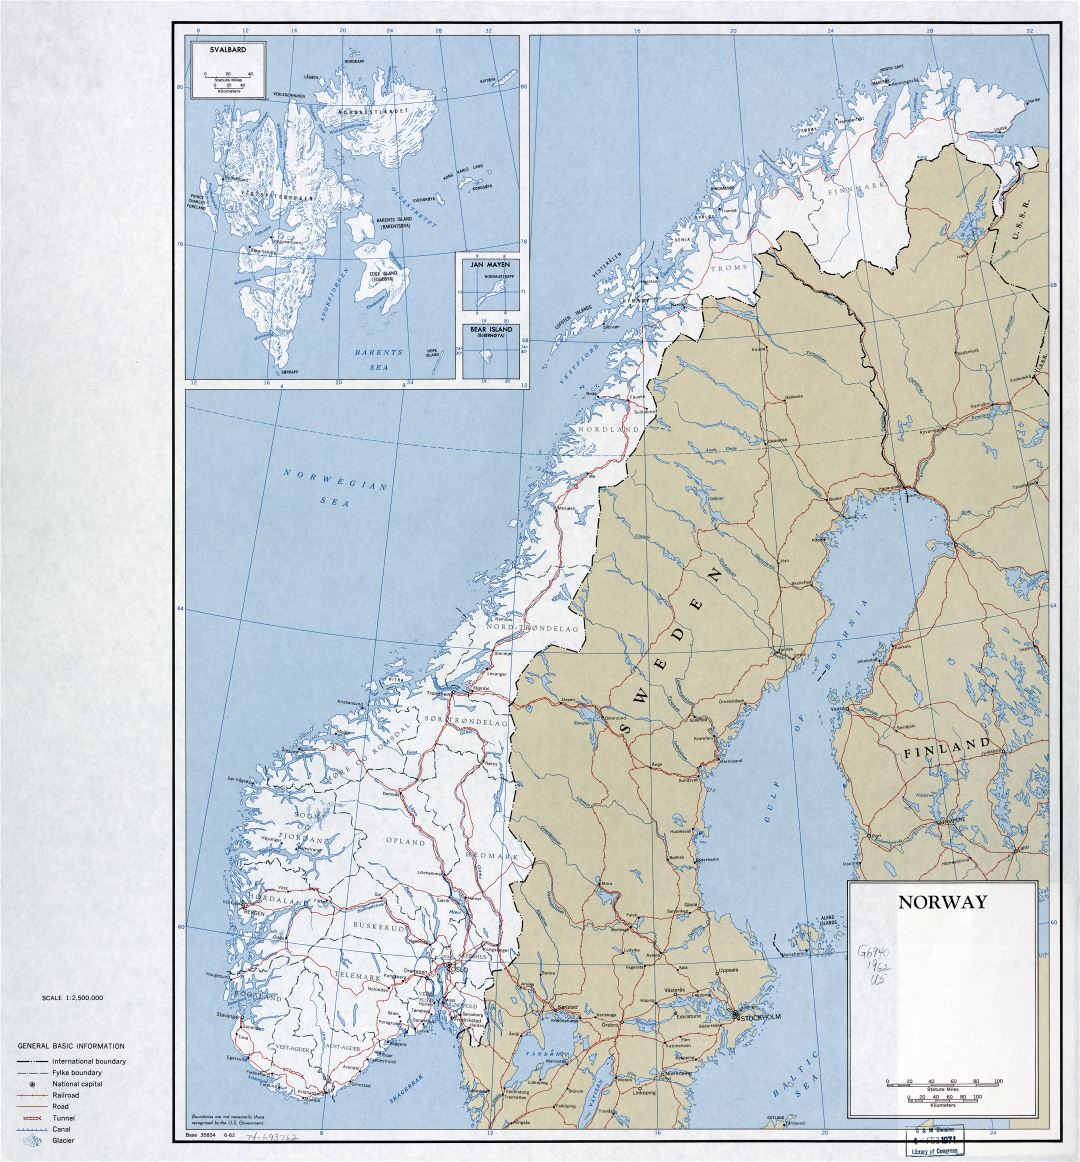 Large scale political and administrative map of Norway and Svalbard with roads, railroads and major cities - 1962